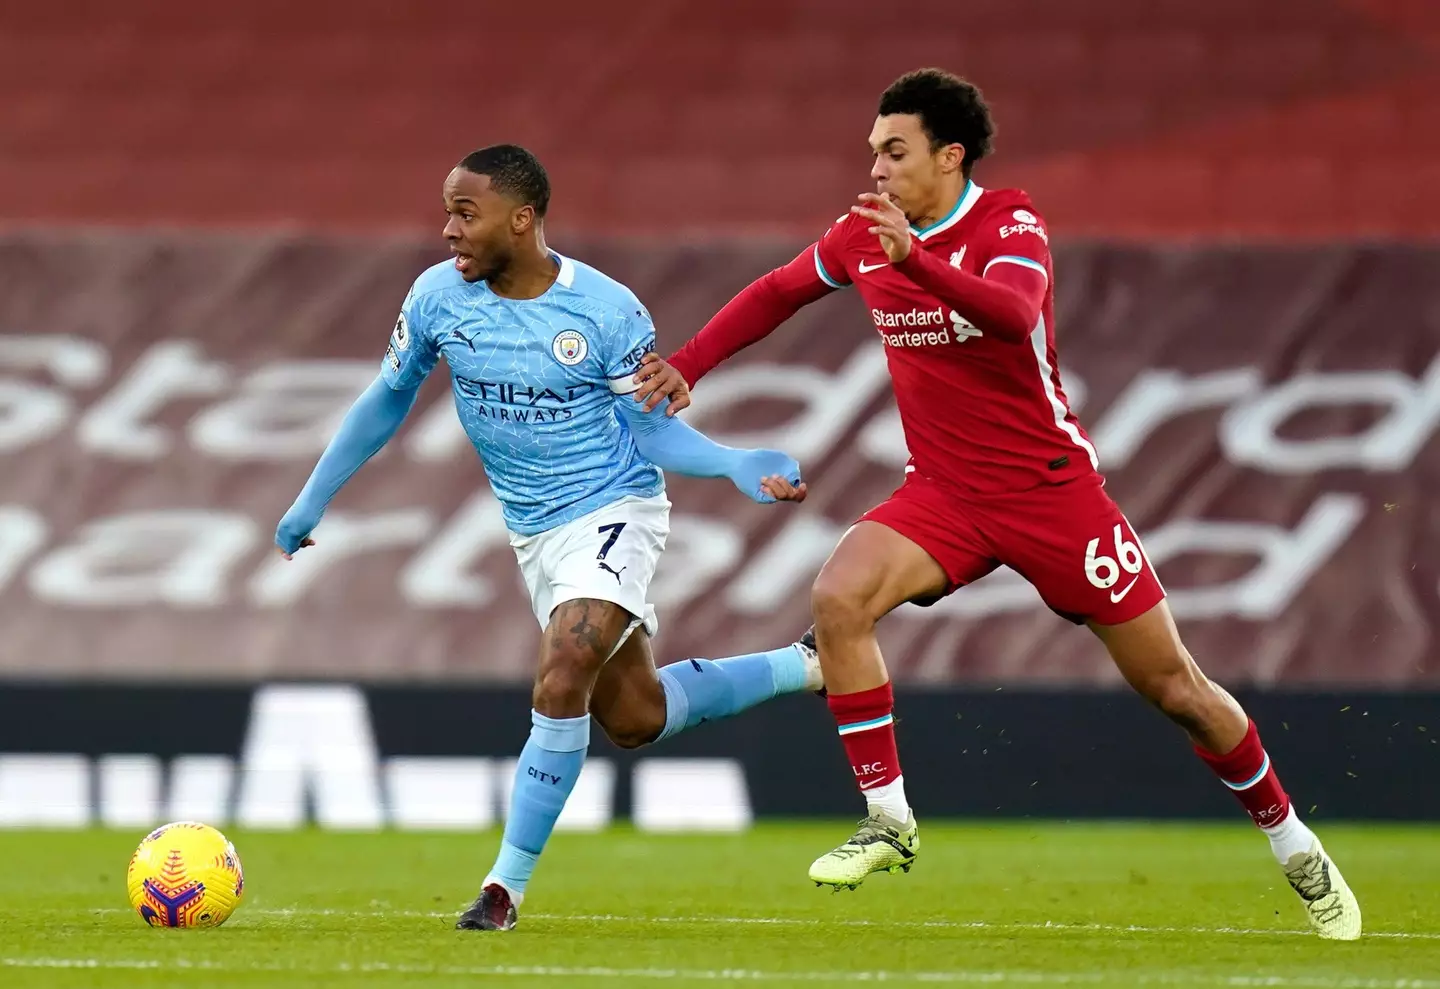 Manchester City's Raheem Sterling (left) and Liverpool's Trent Alexander-Arnold battle for the ball during the Premier League match at Anfield, Liverpool. (Alamy)